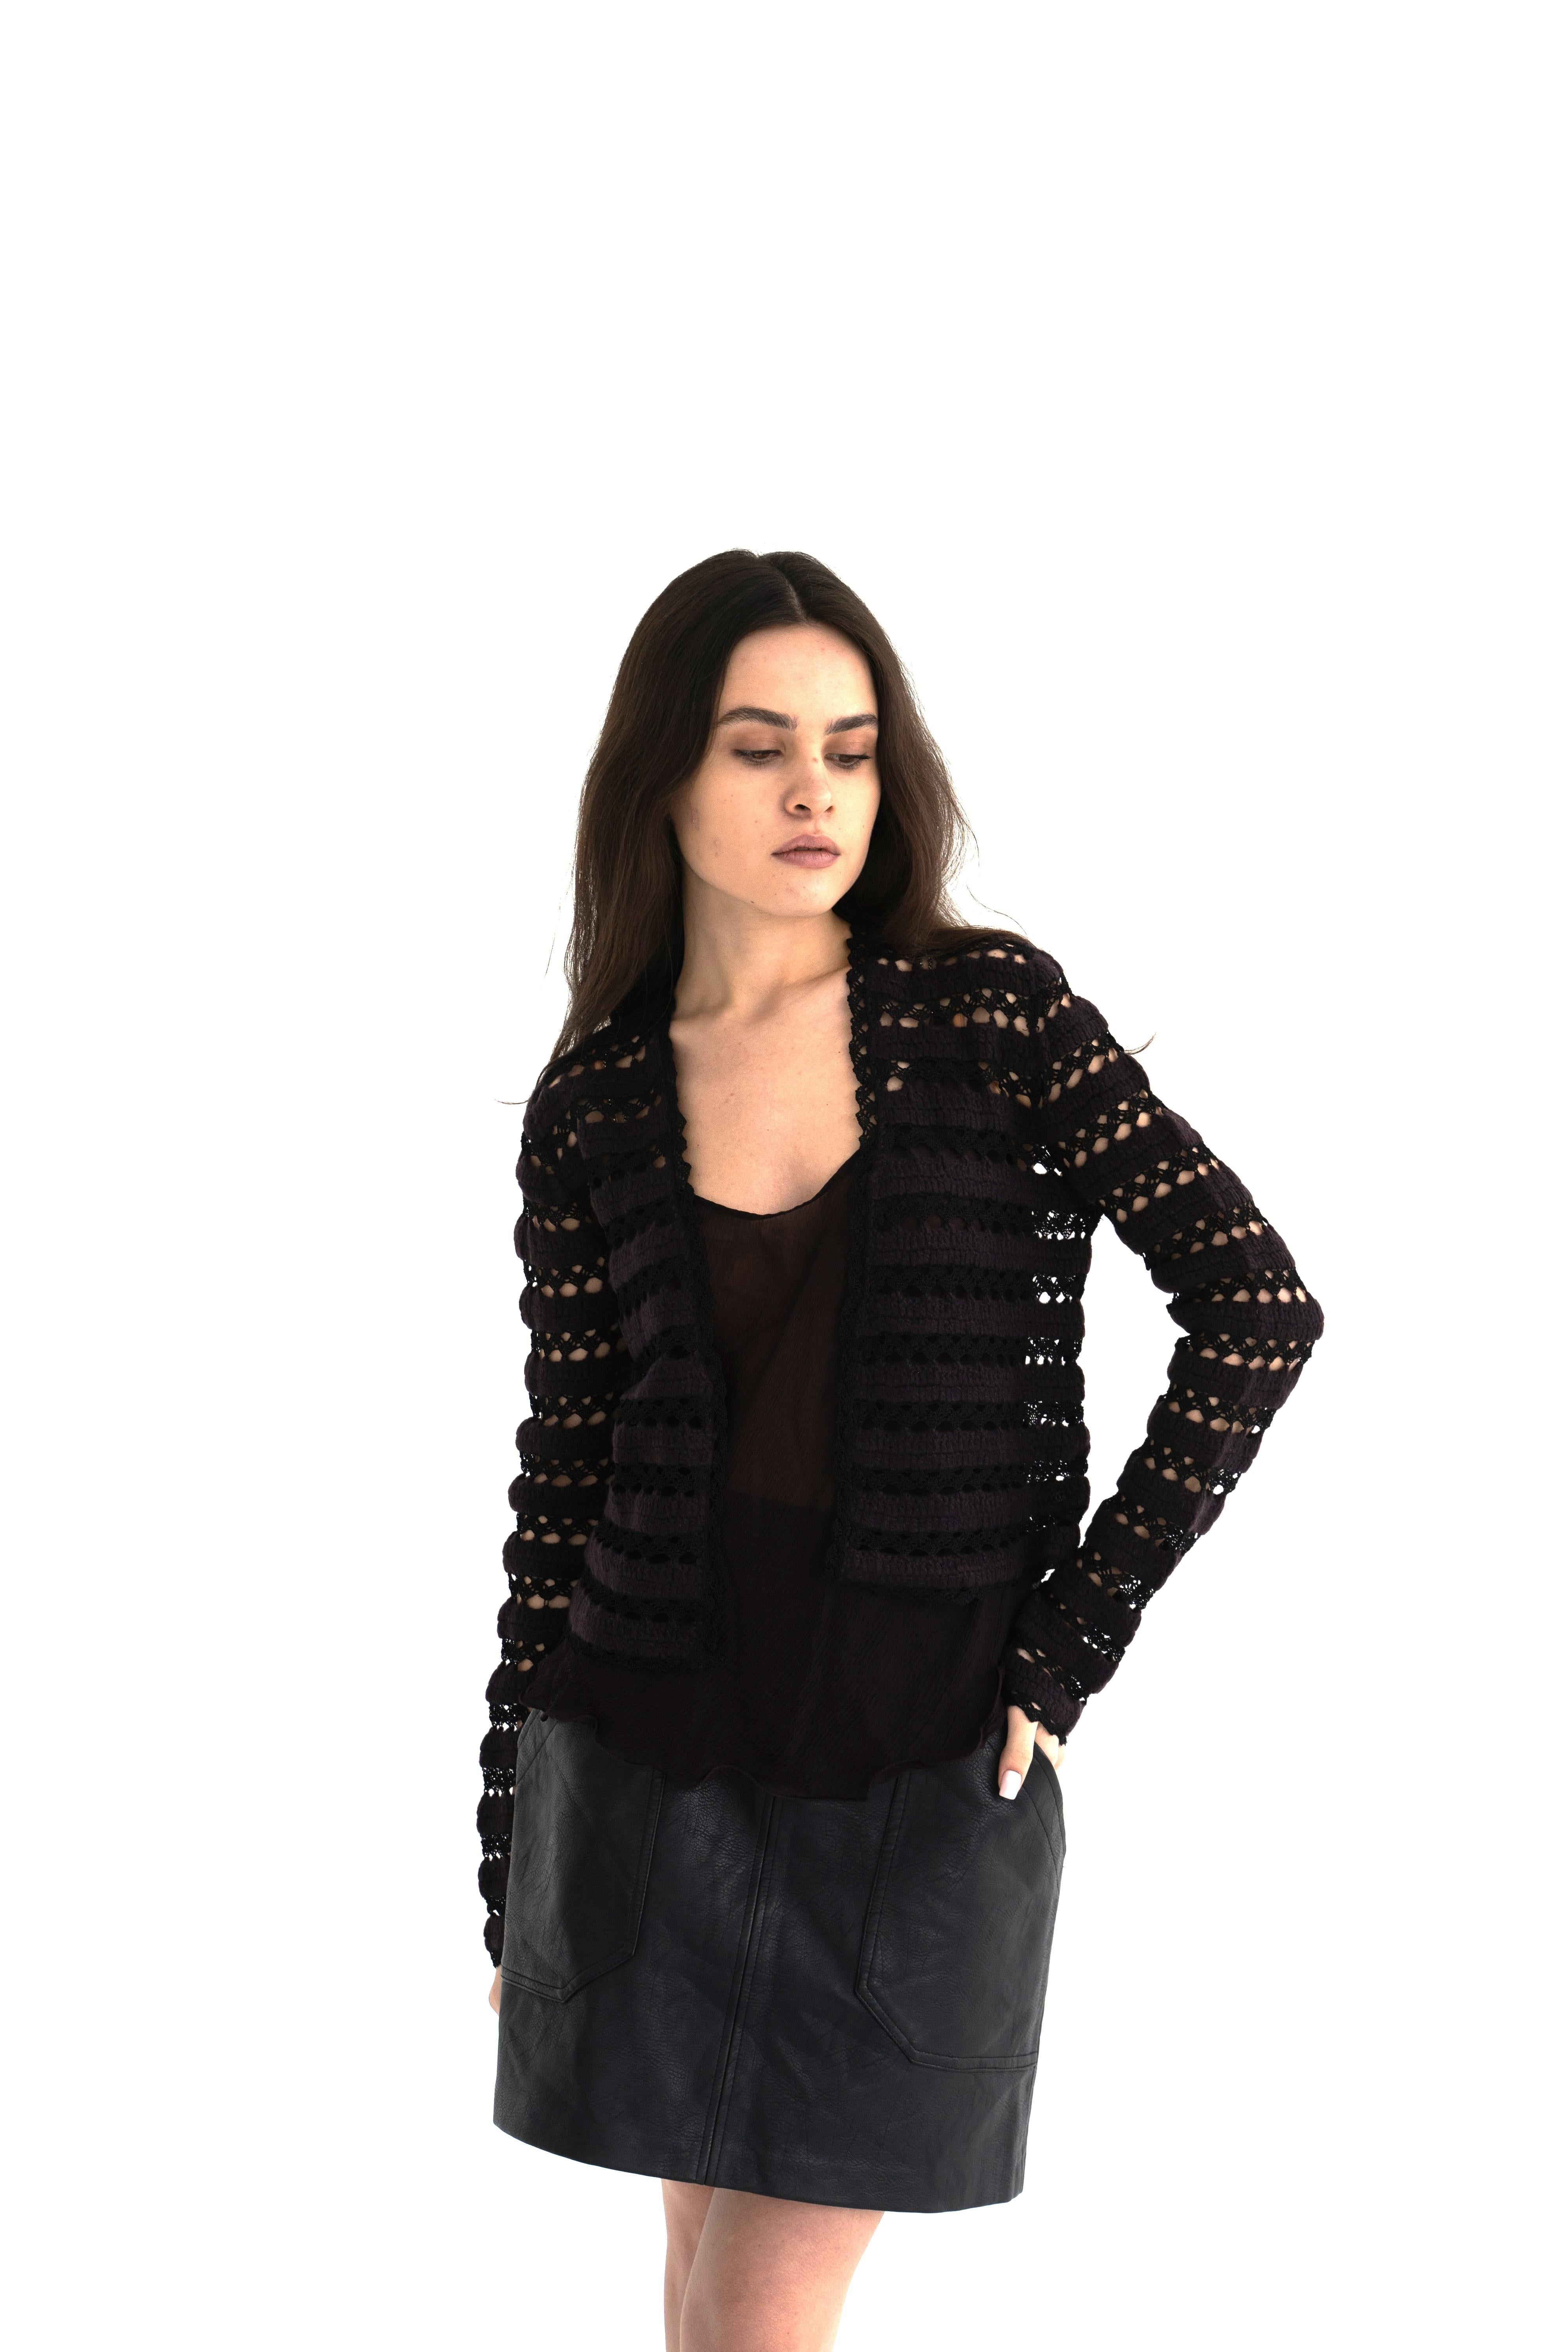 CHANEL 02A 2002-2003 Fall RTW cardigan / top Karl Lagerfeld  In Excellent Condition For Sale In Алматинский Почтамт, KZ